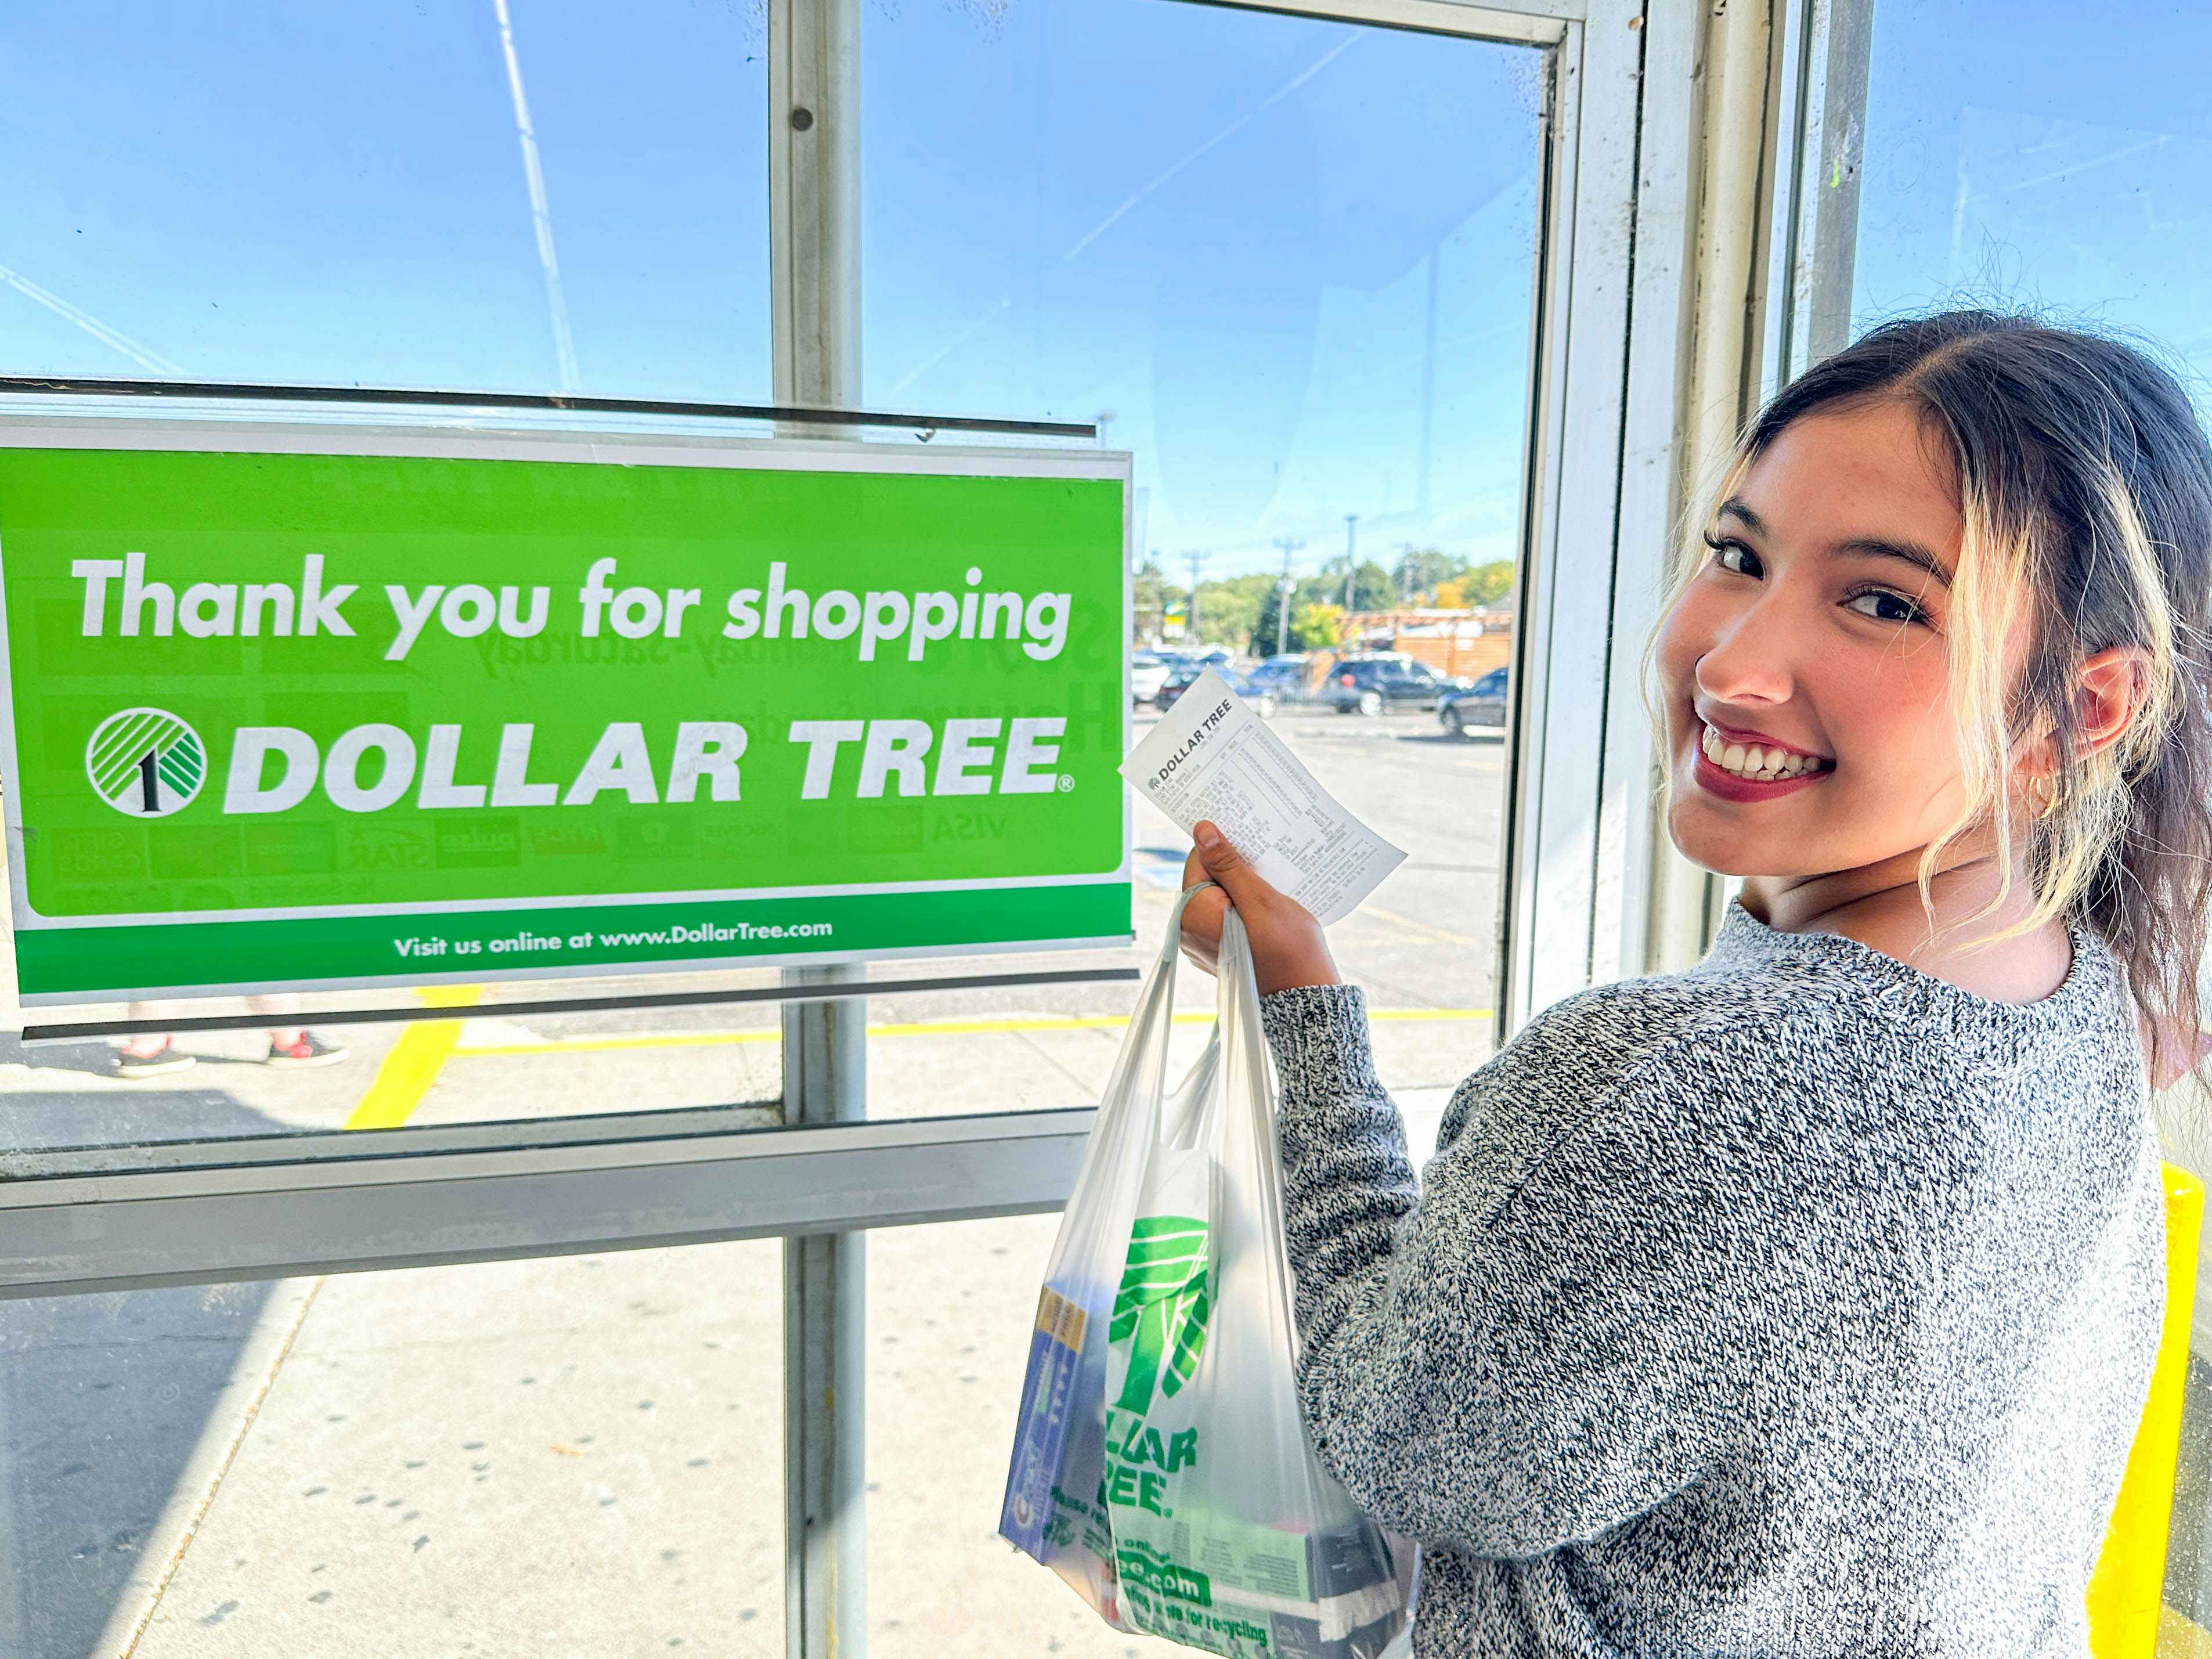 a woman smiling holding her dollar tree bag and receipt in store 